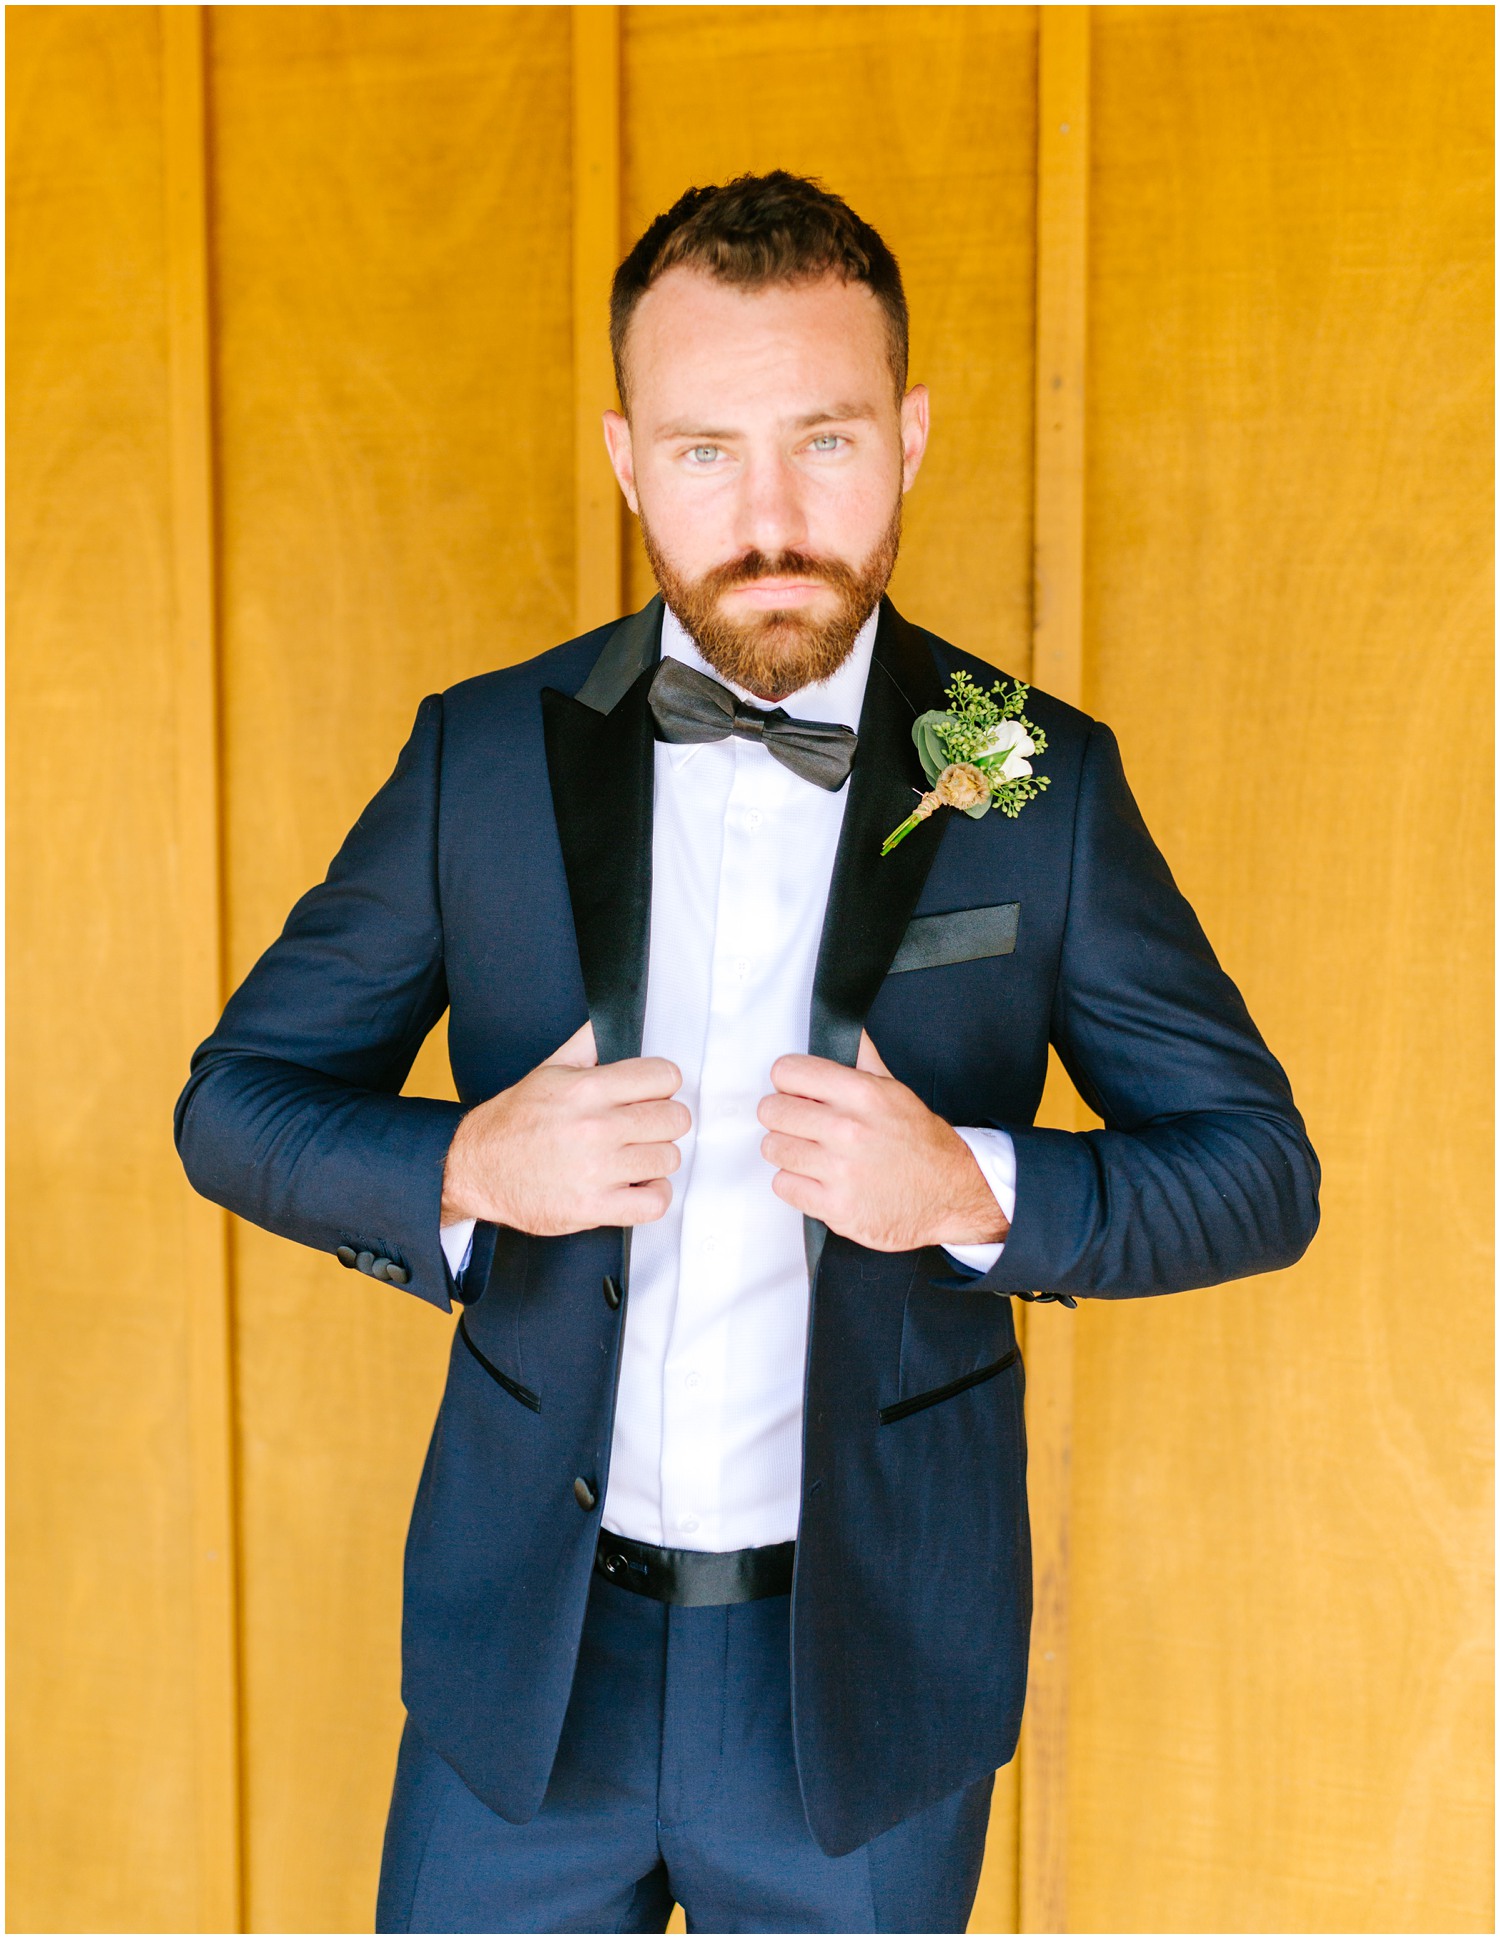 groom adjusts suit in front of wooden paneled wall